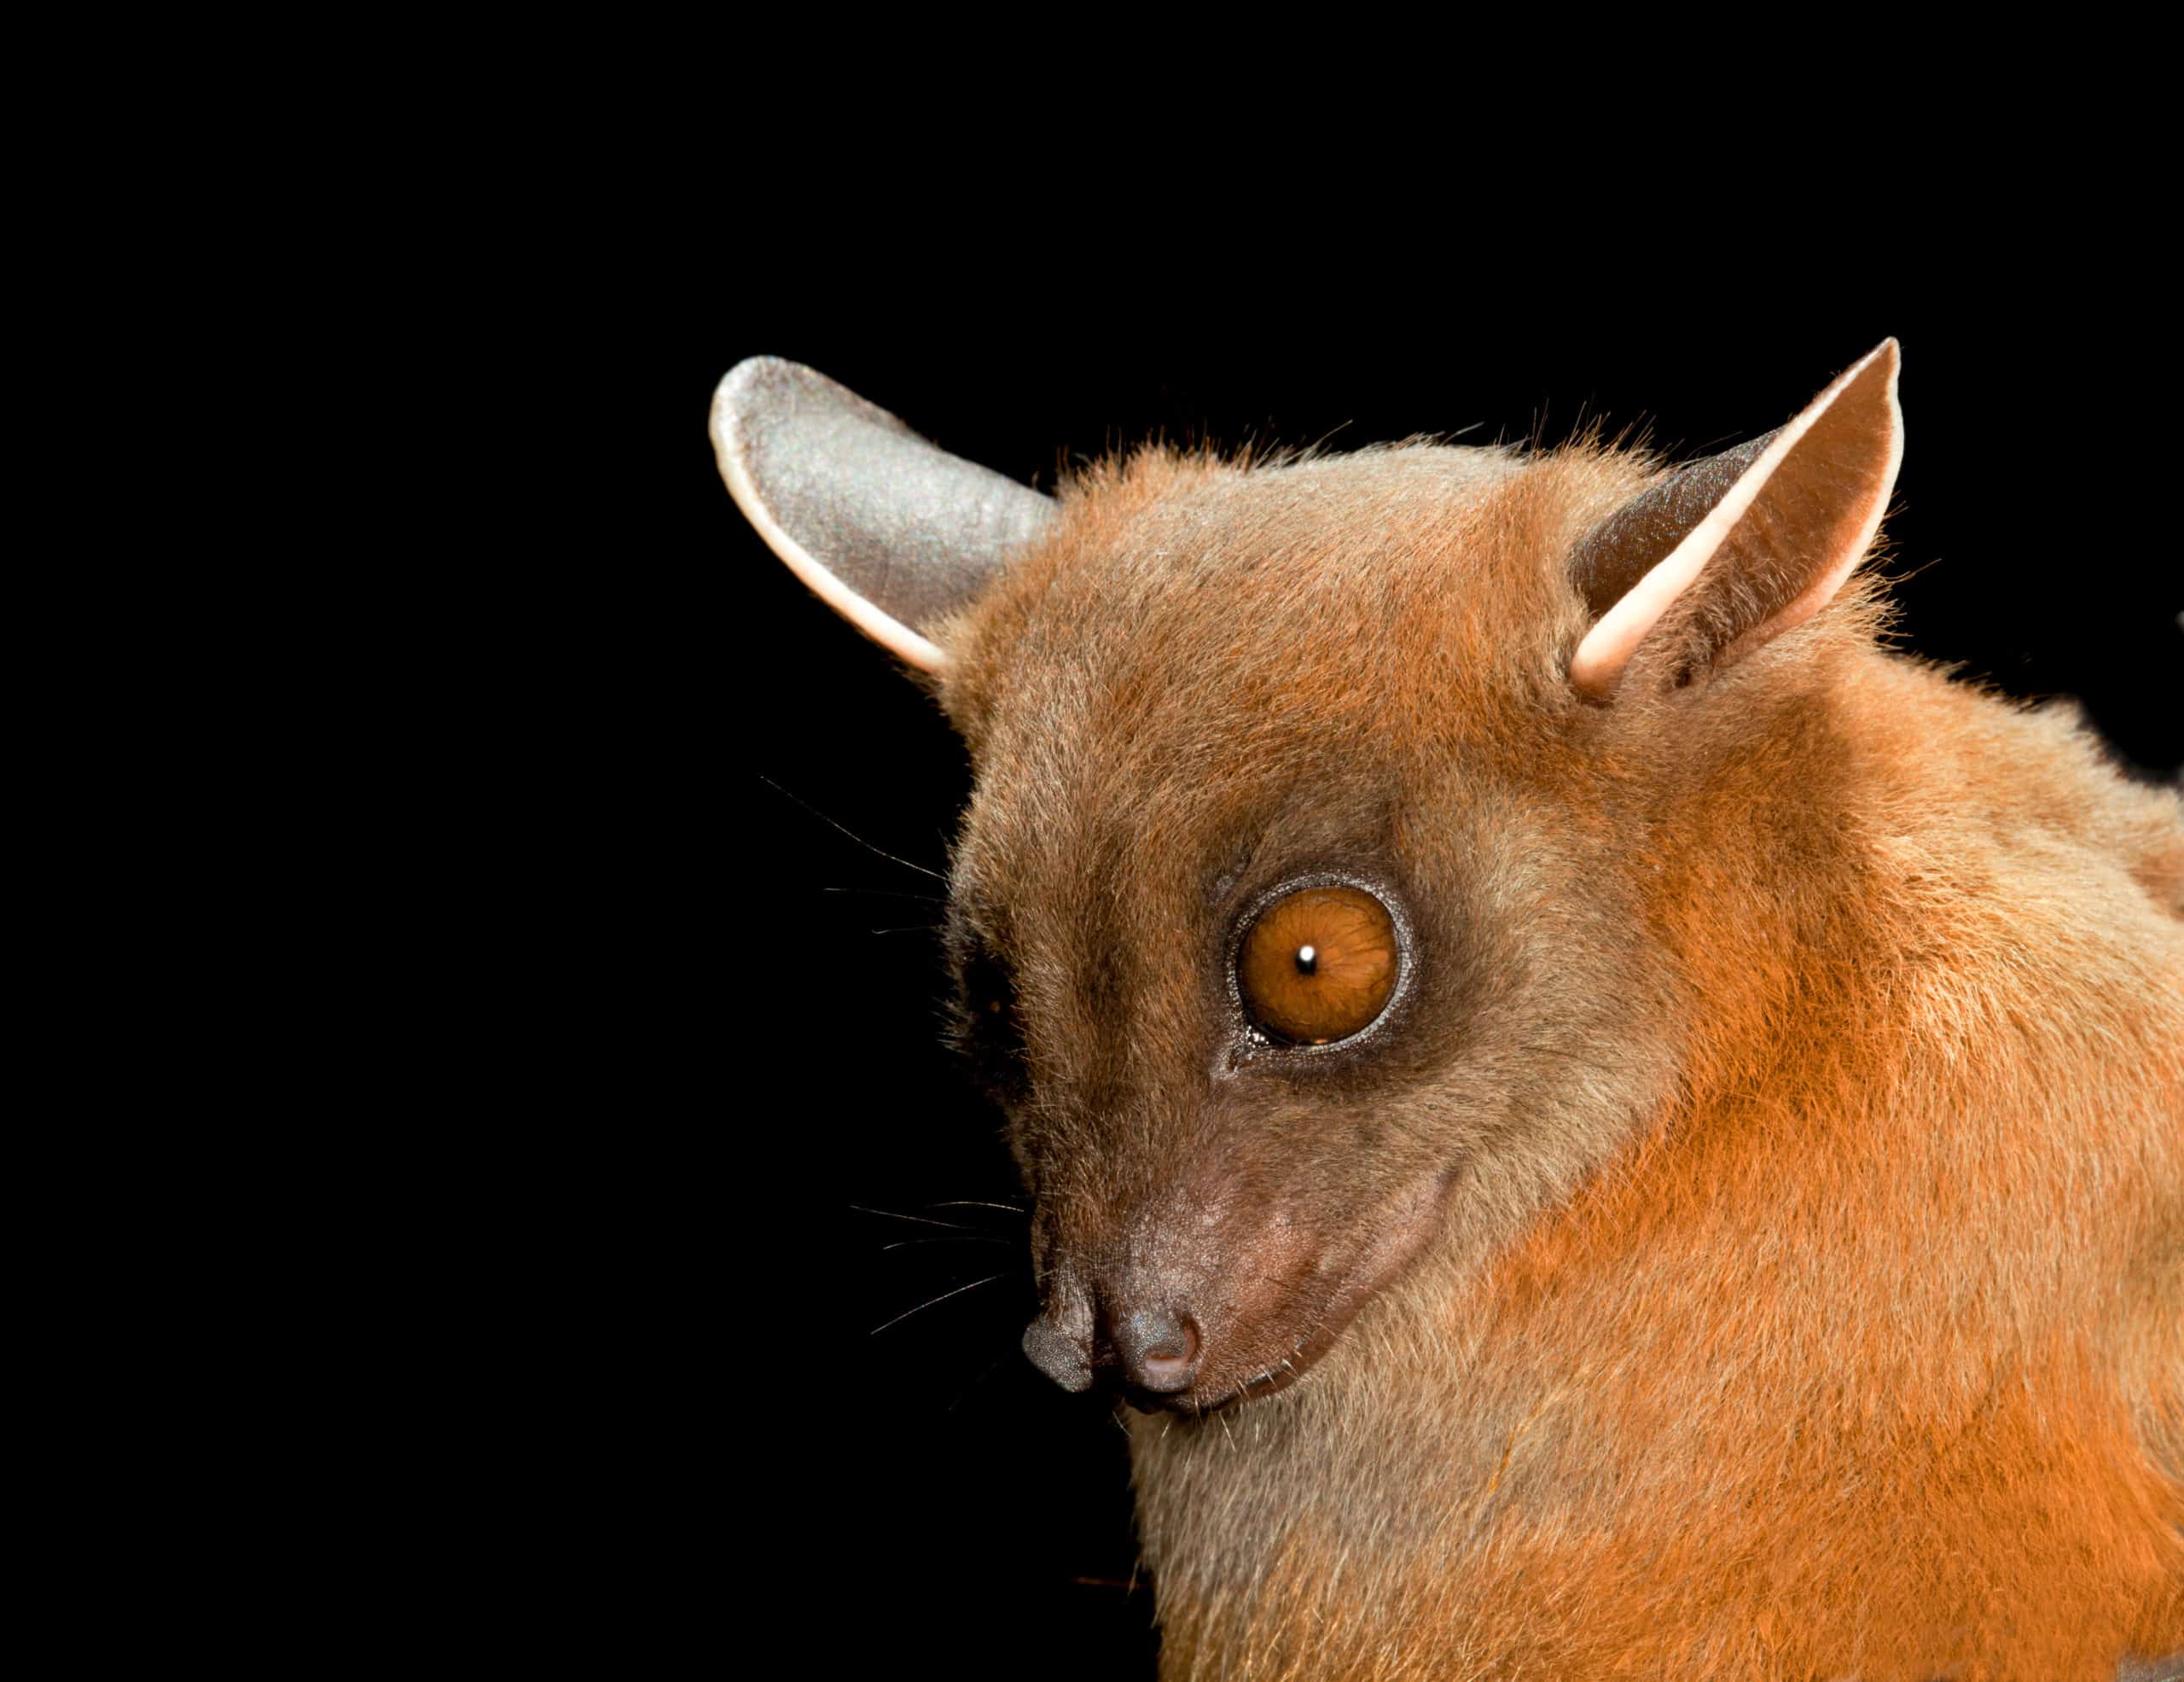 Many Bats and vampire pictures Greater-short-nosed-fruit-bat-cynopterus-sphinx-pteropodidae-3